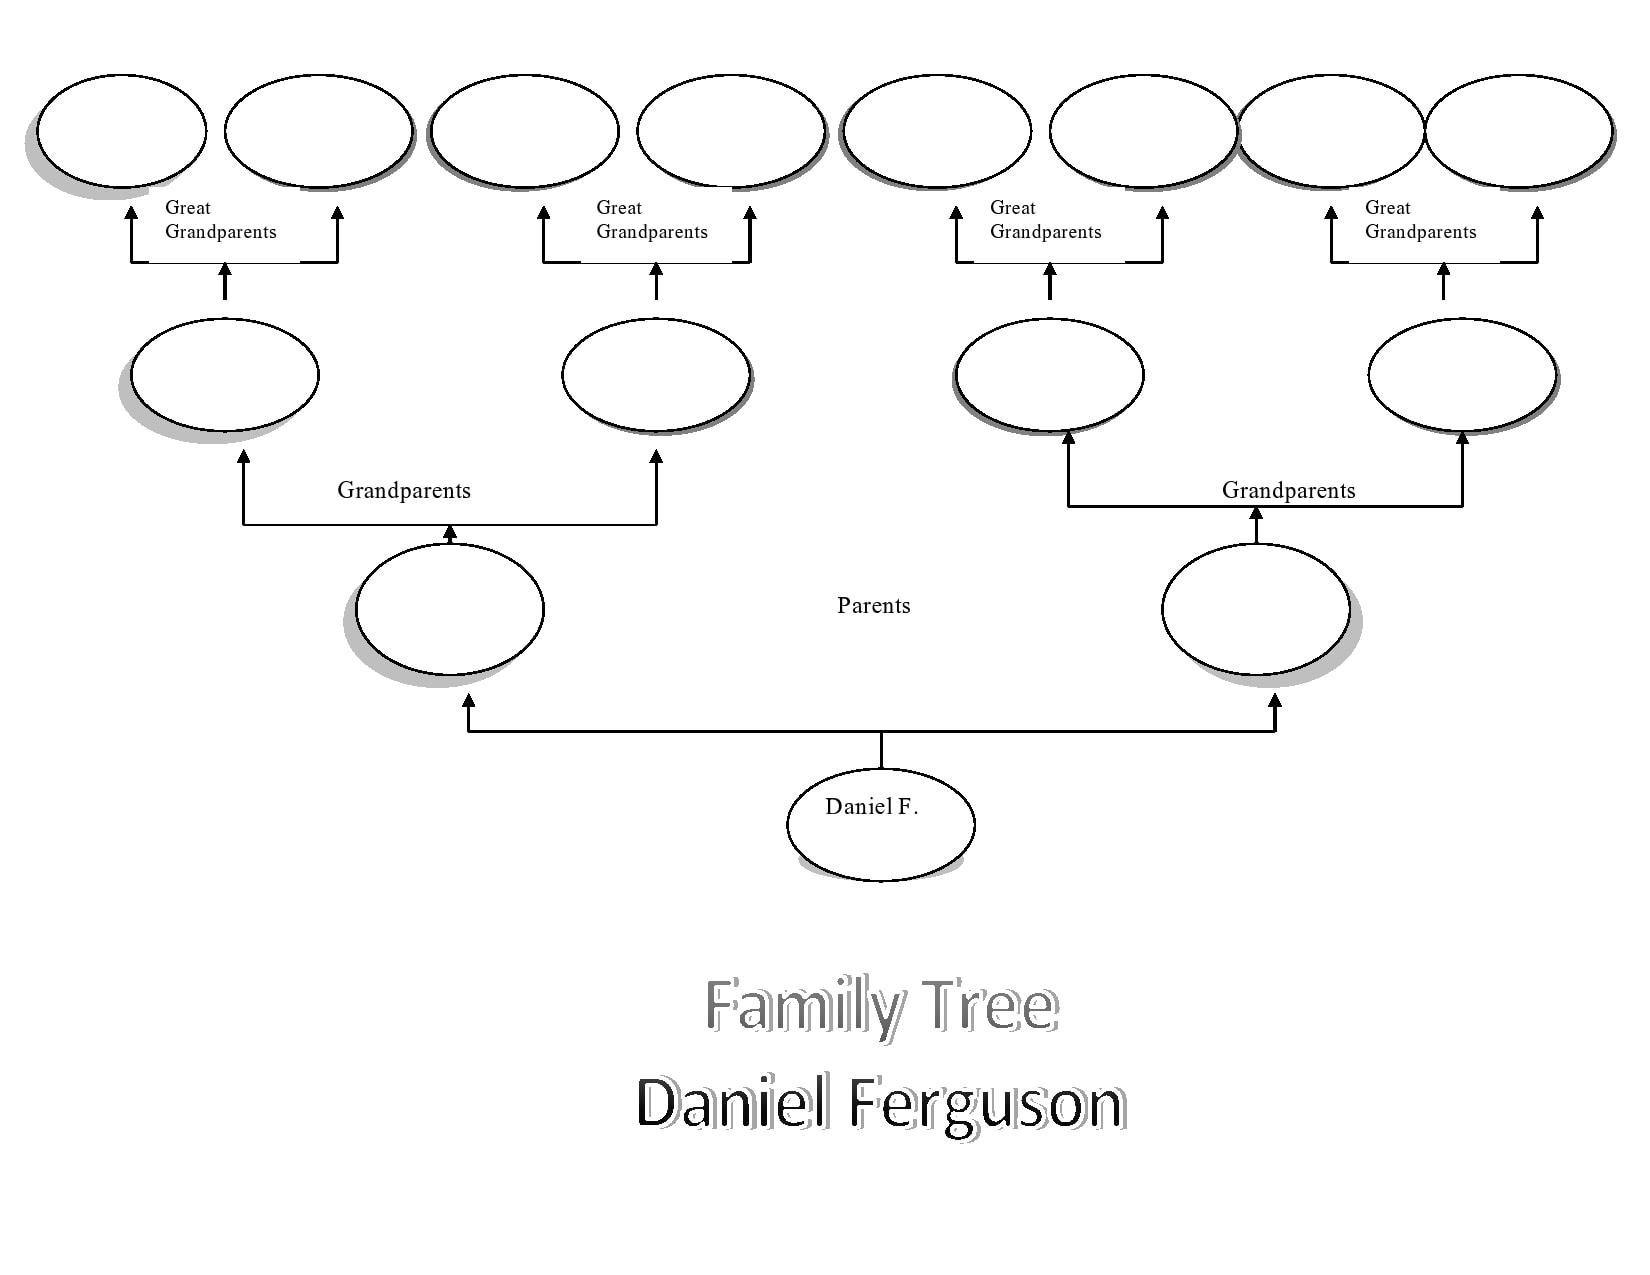 24 Editable Family Tree Templates [24% Free] - TemplateArchive Throughout Blank Tree Diagram Template